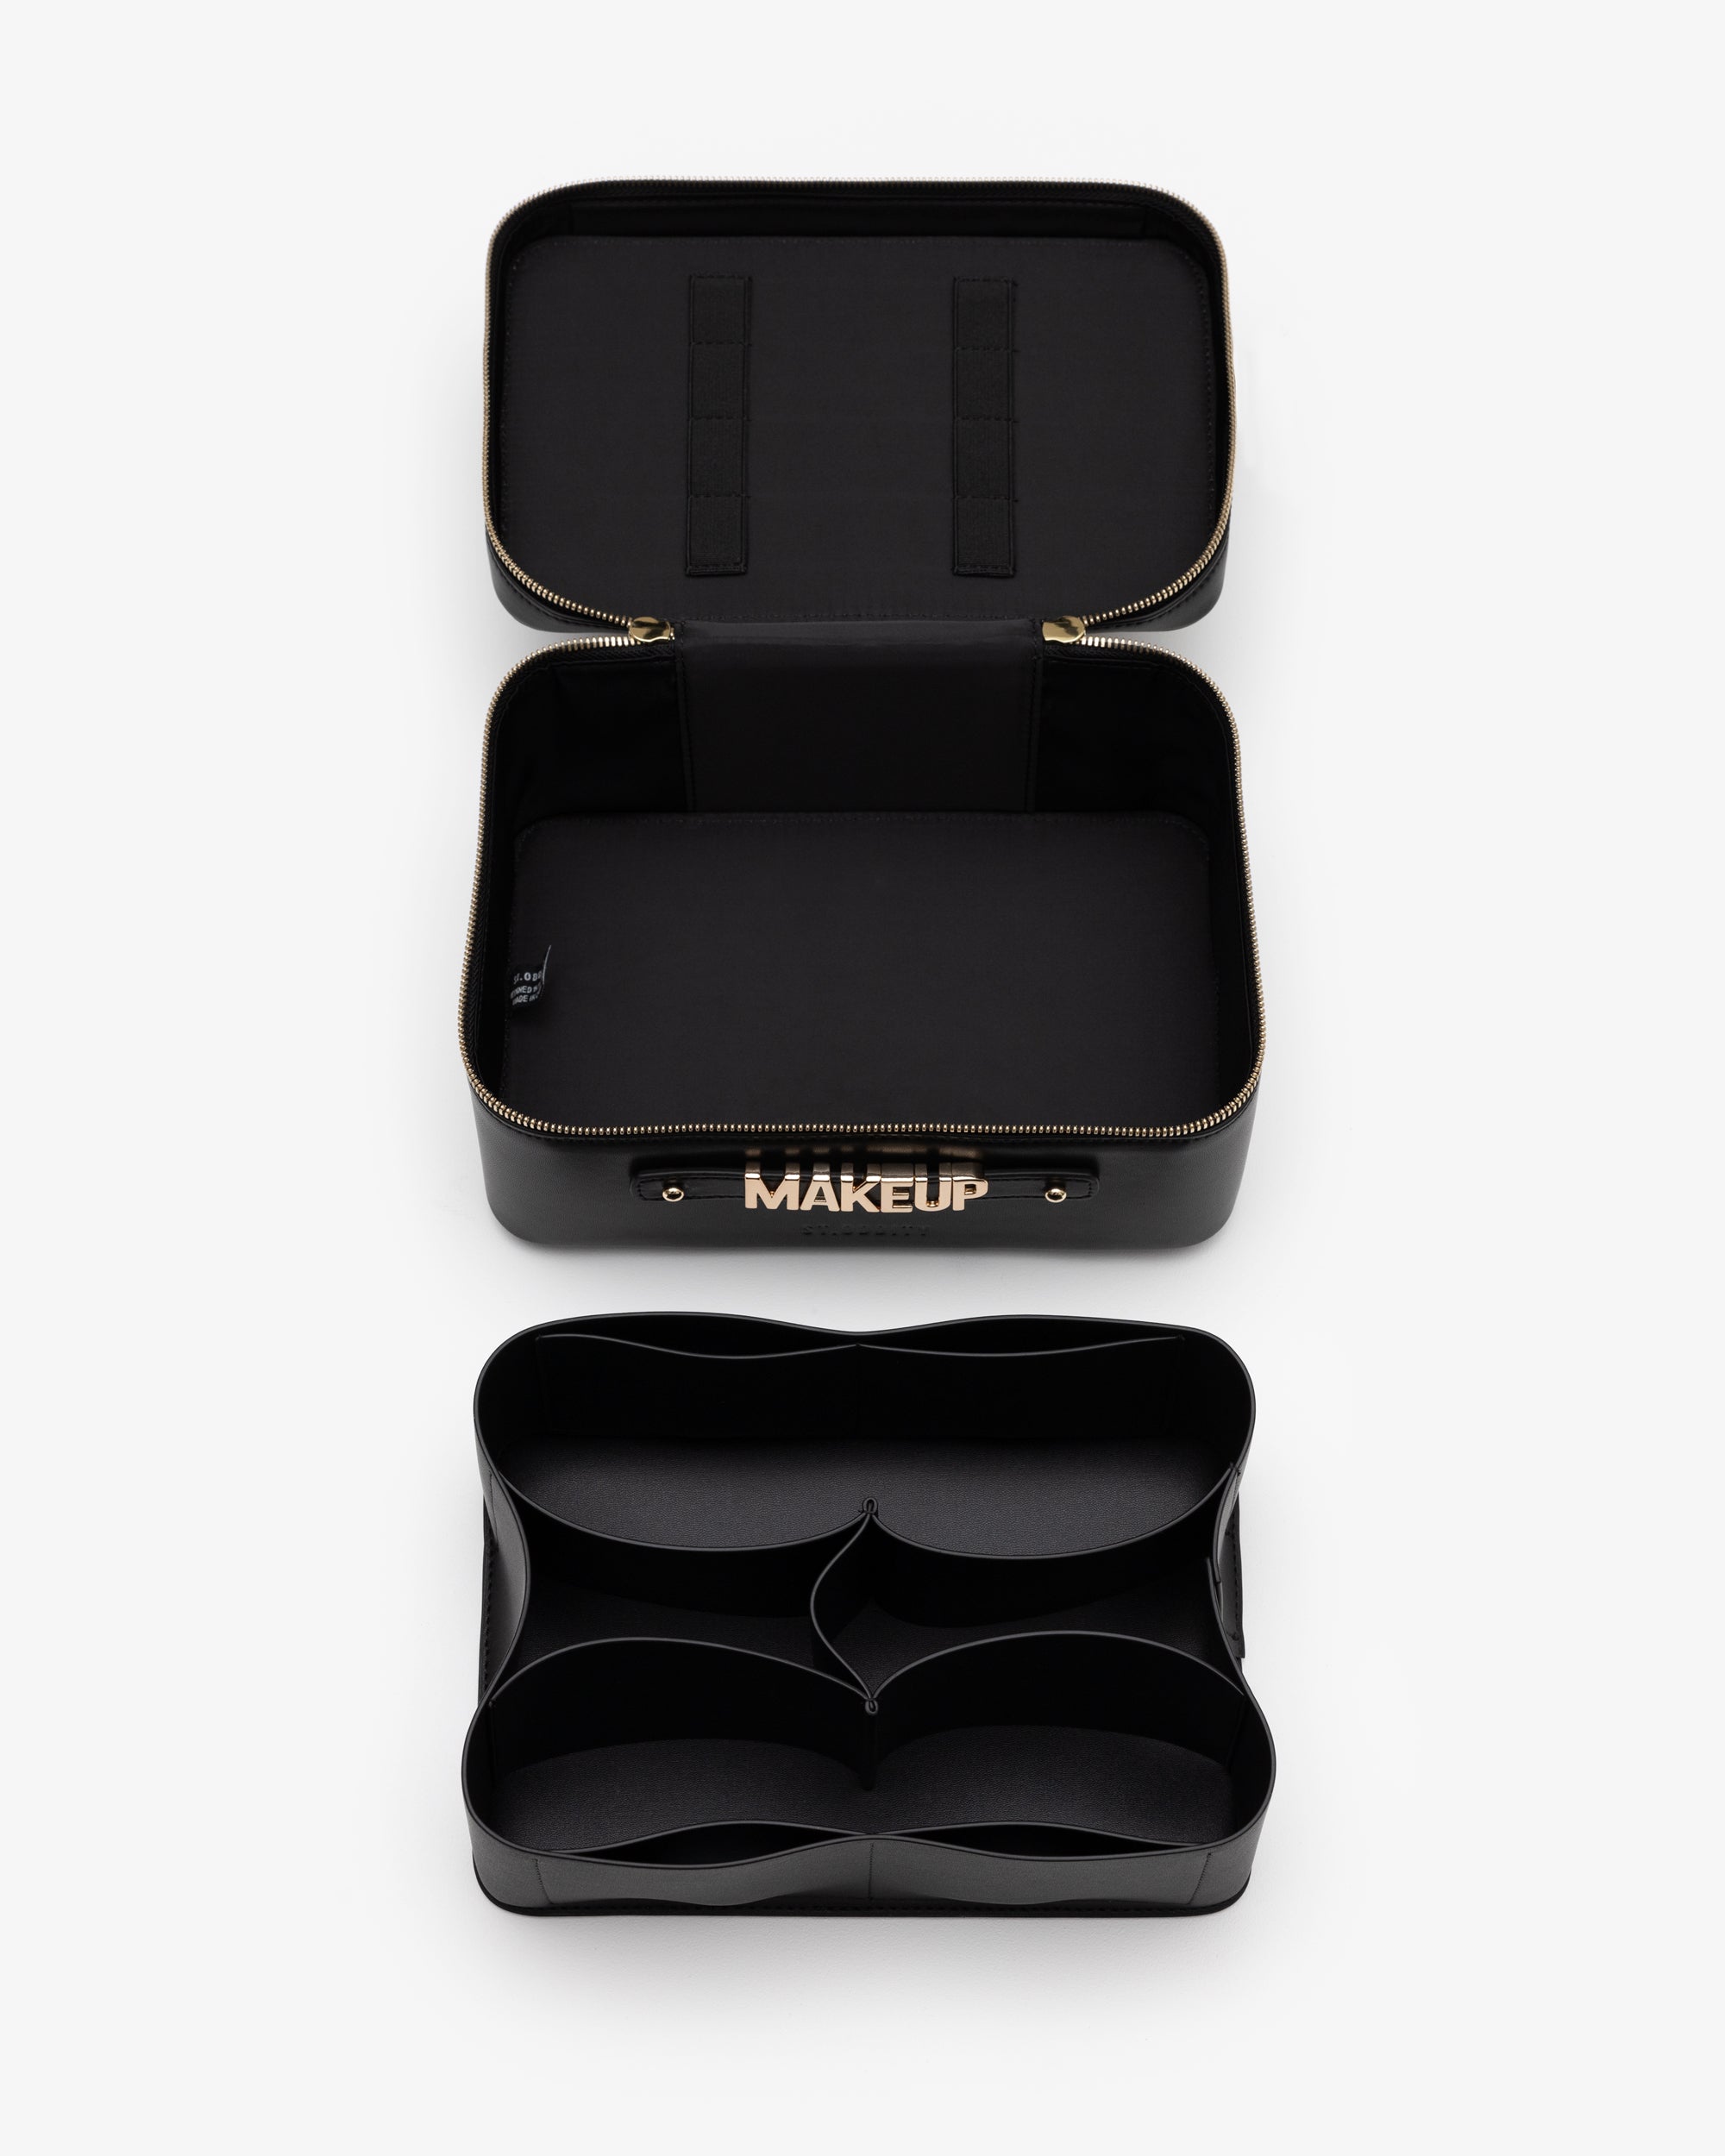 Pre-order (Mid-May): Vanity Case in Black/Gold with Personalised Hardware